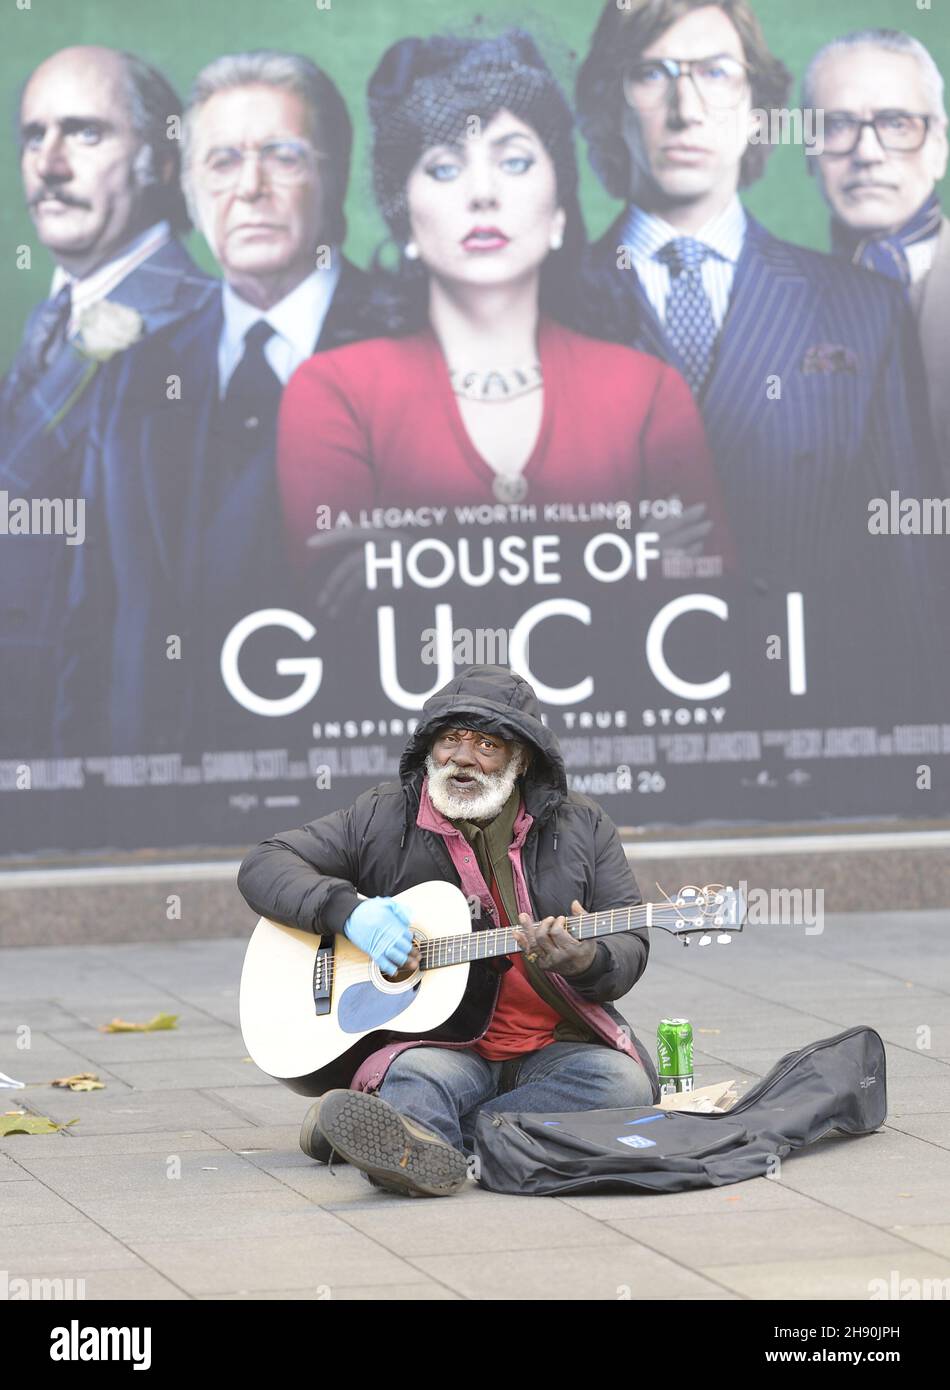 London, England, UK. Elderly black man busking/begging in Leicester Square in fron of afilm poster for House of Gucci - December 2021 Stock Photo